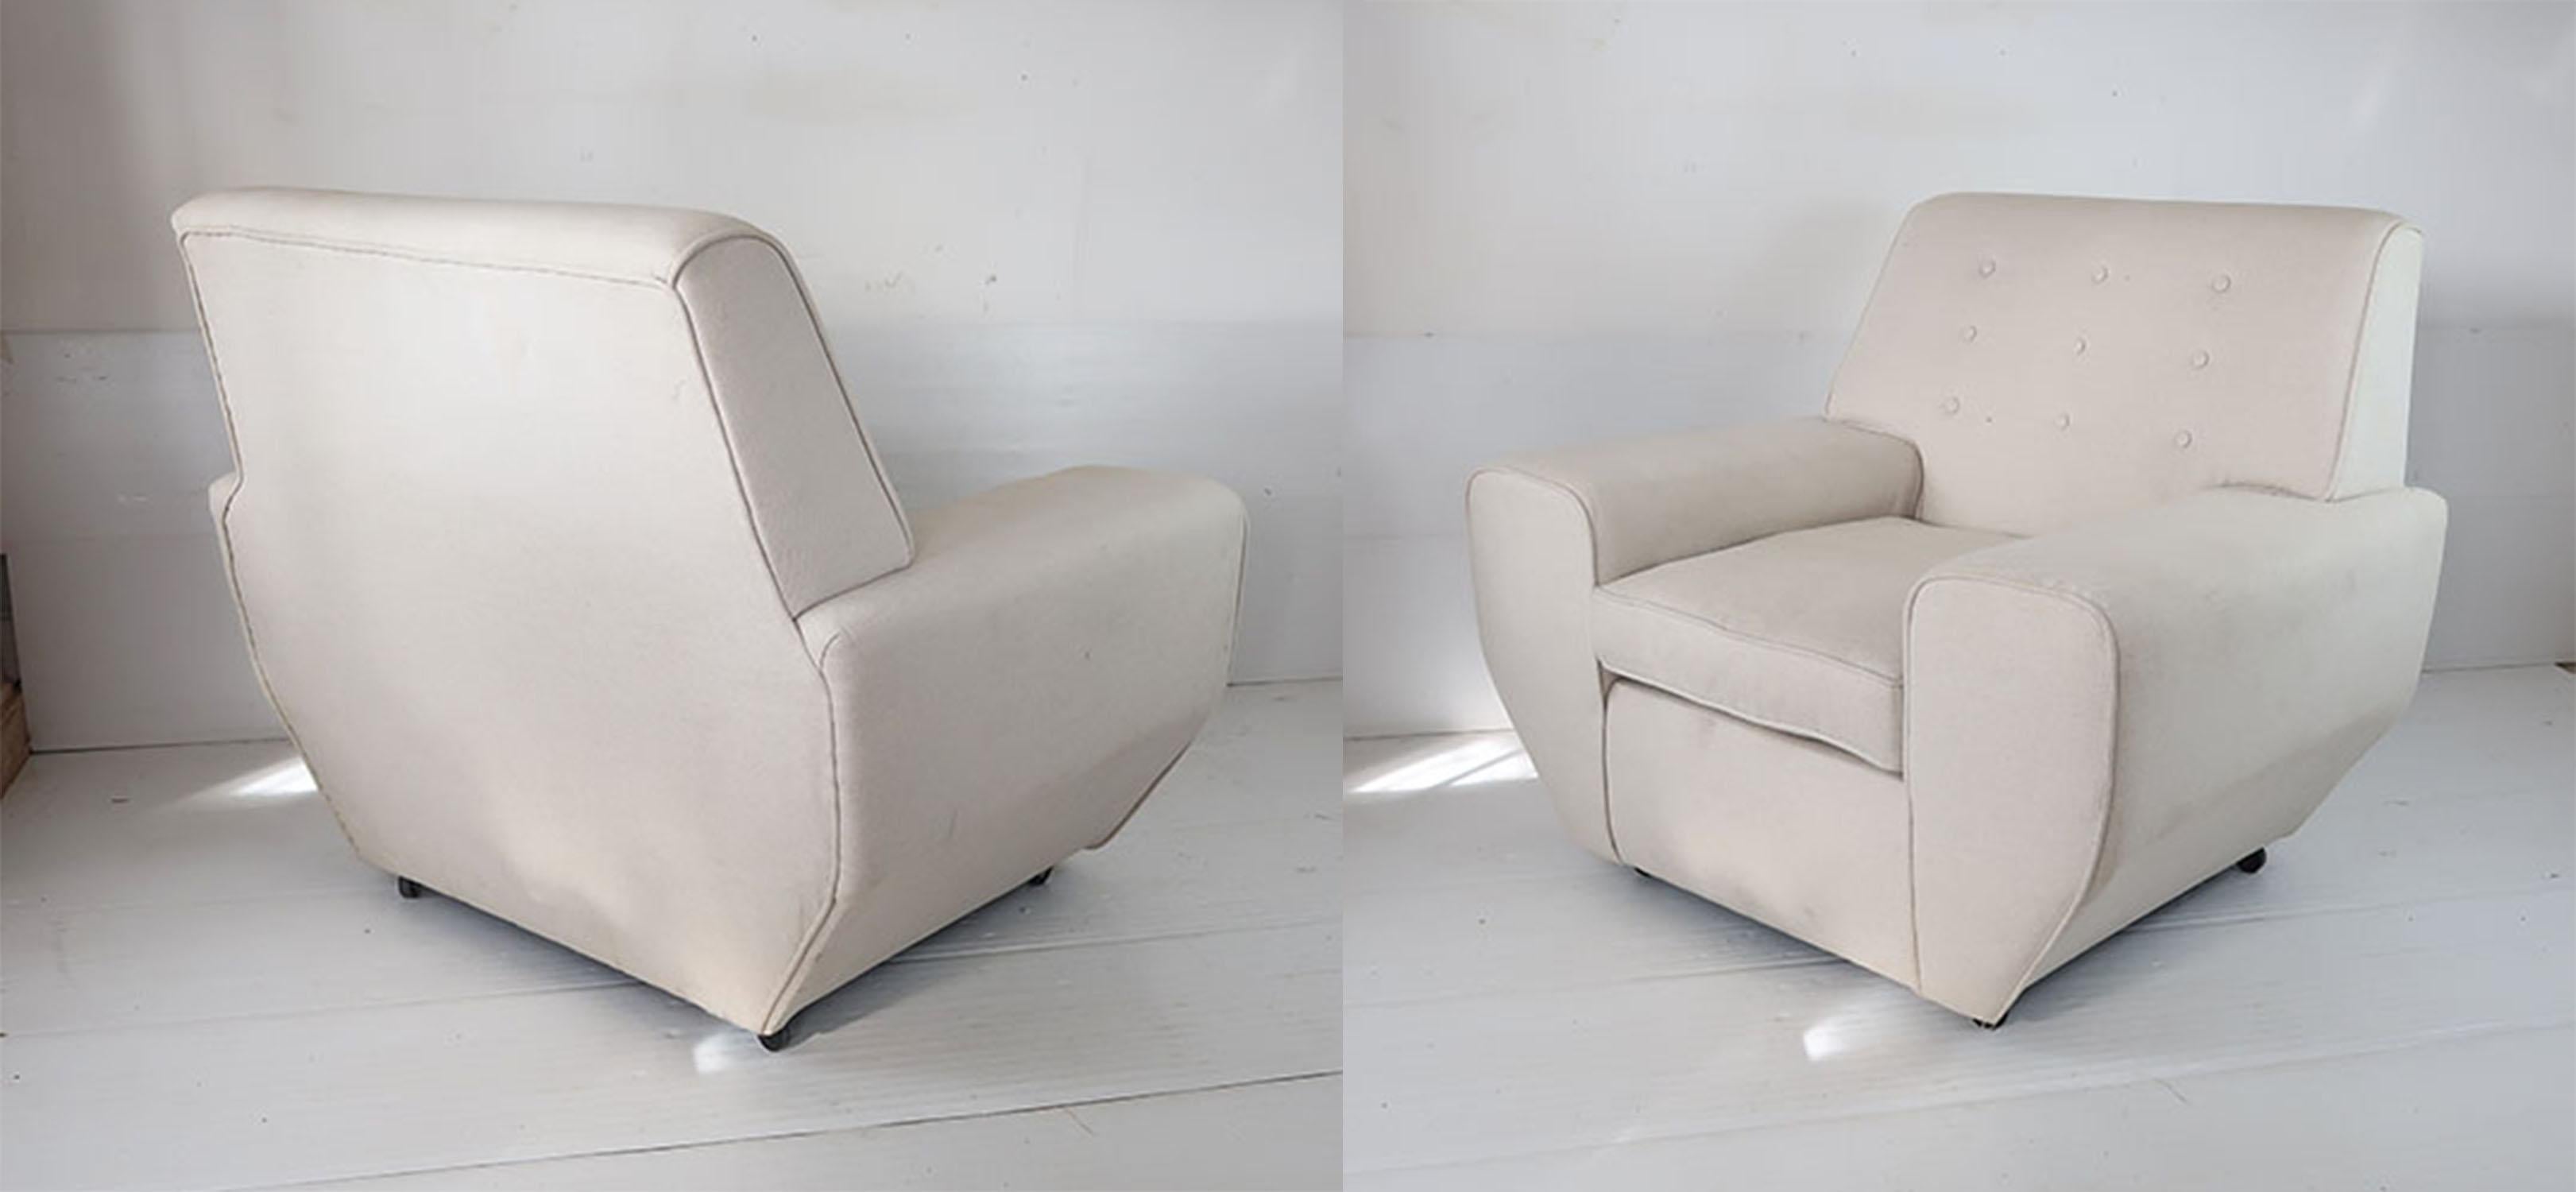 Hand-Crafted Pair of Geometric Cream Linen Upholstered Midcentury Lounge Chairs